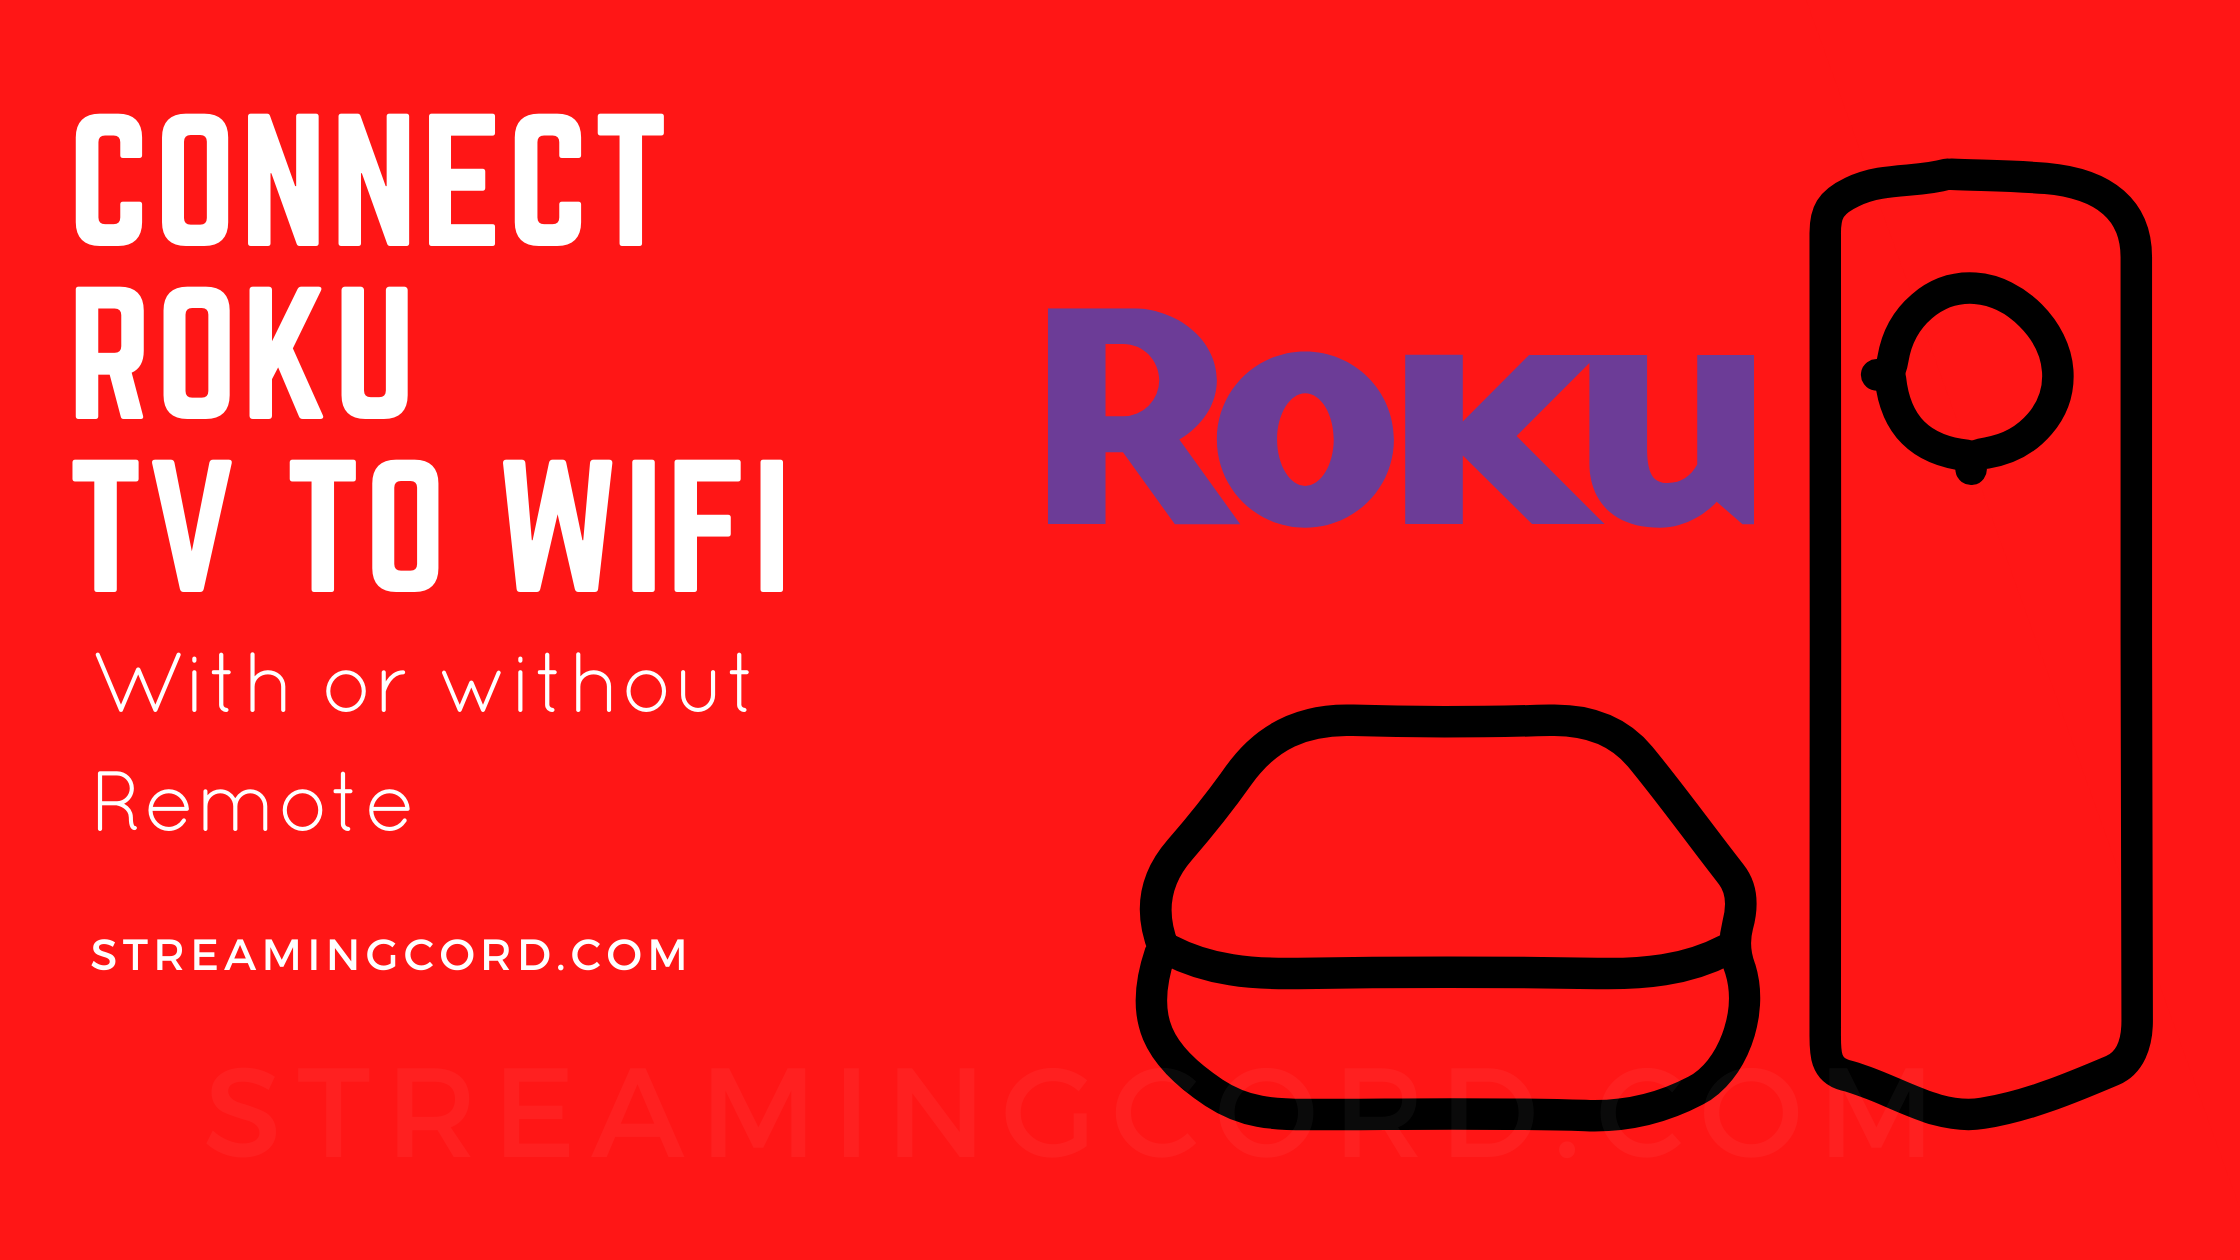 Connect Roku to WiFi without remote